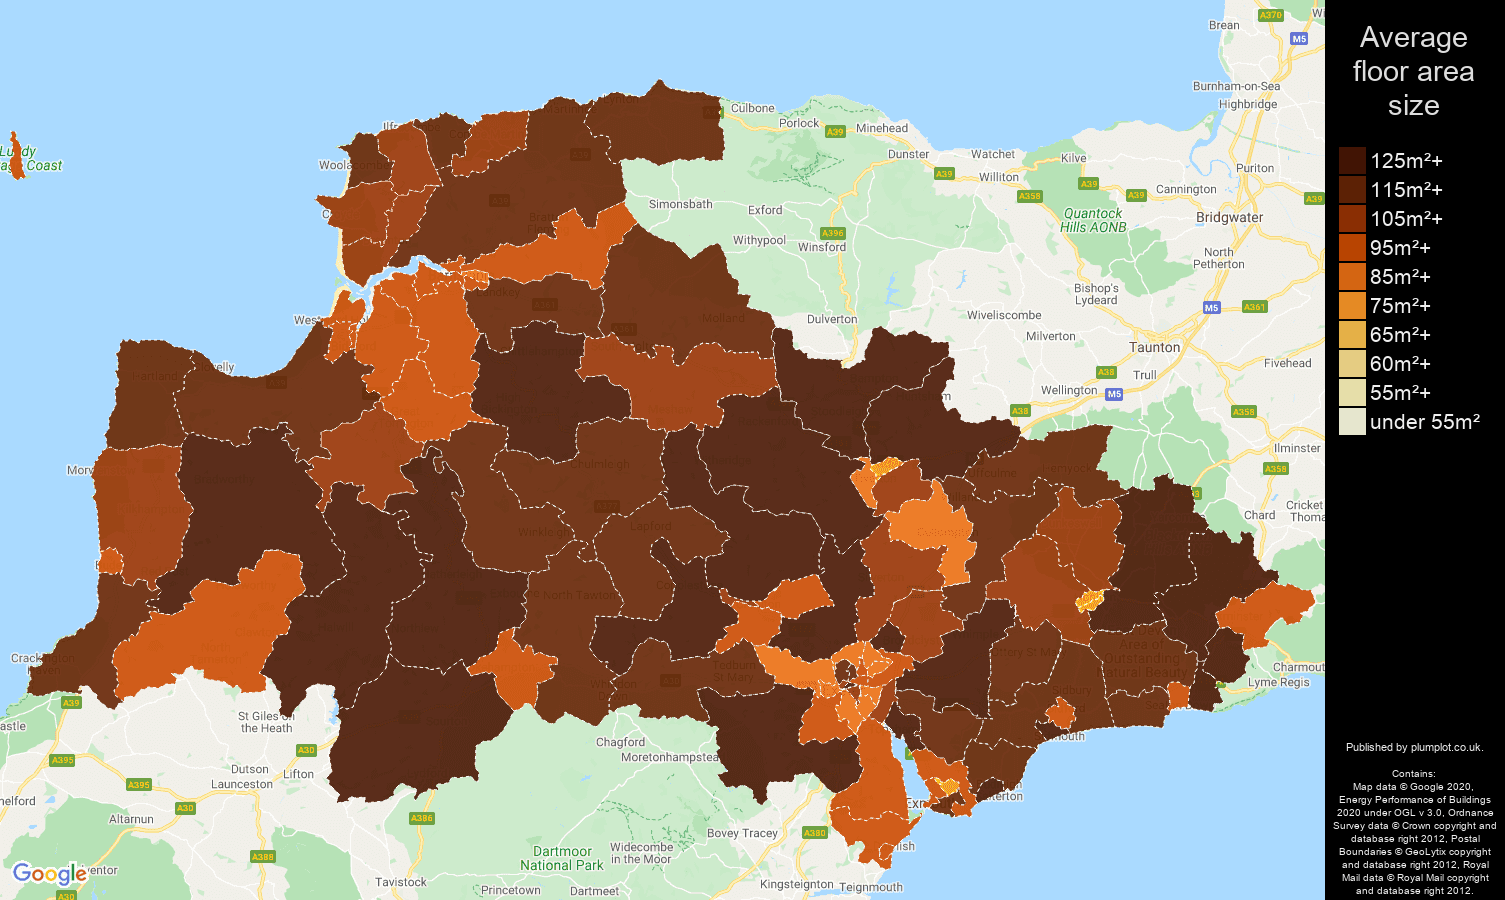 Exeter map of average floor area size of houses